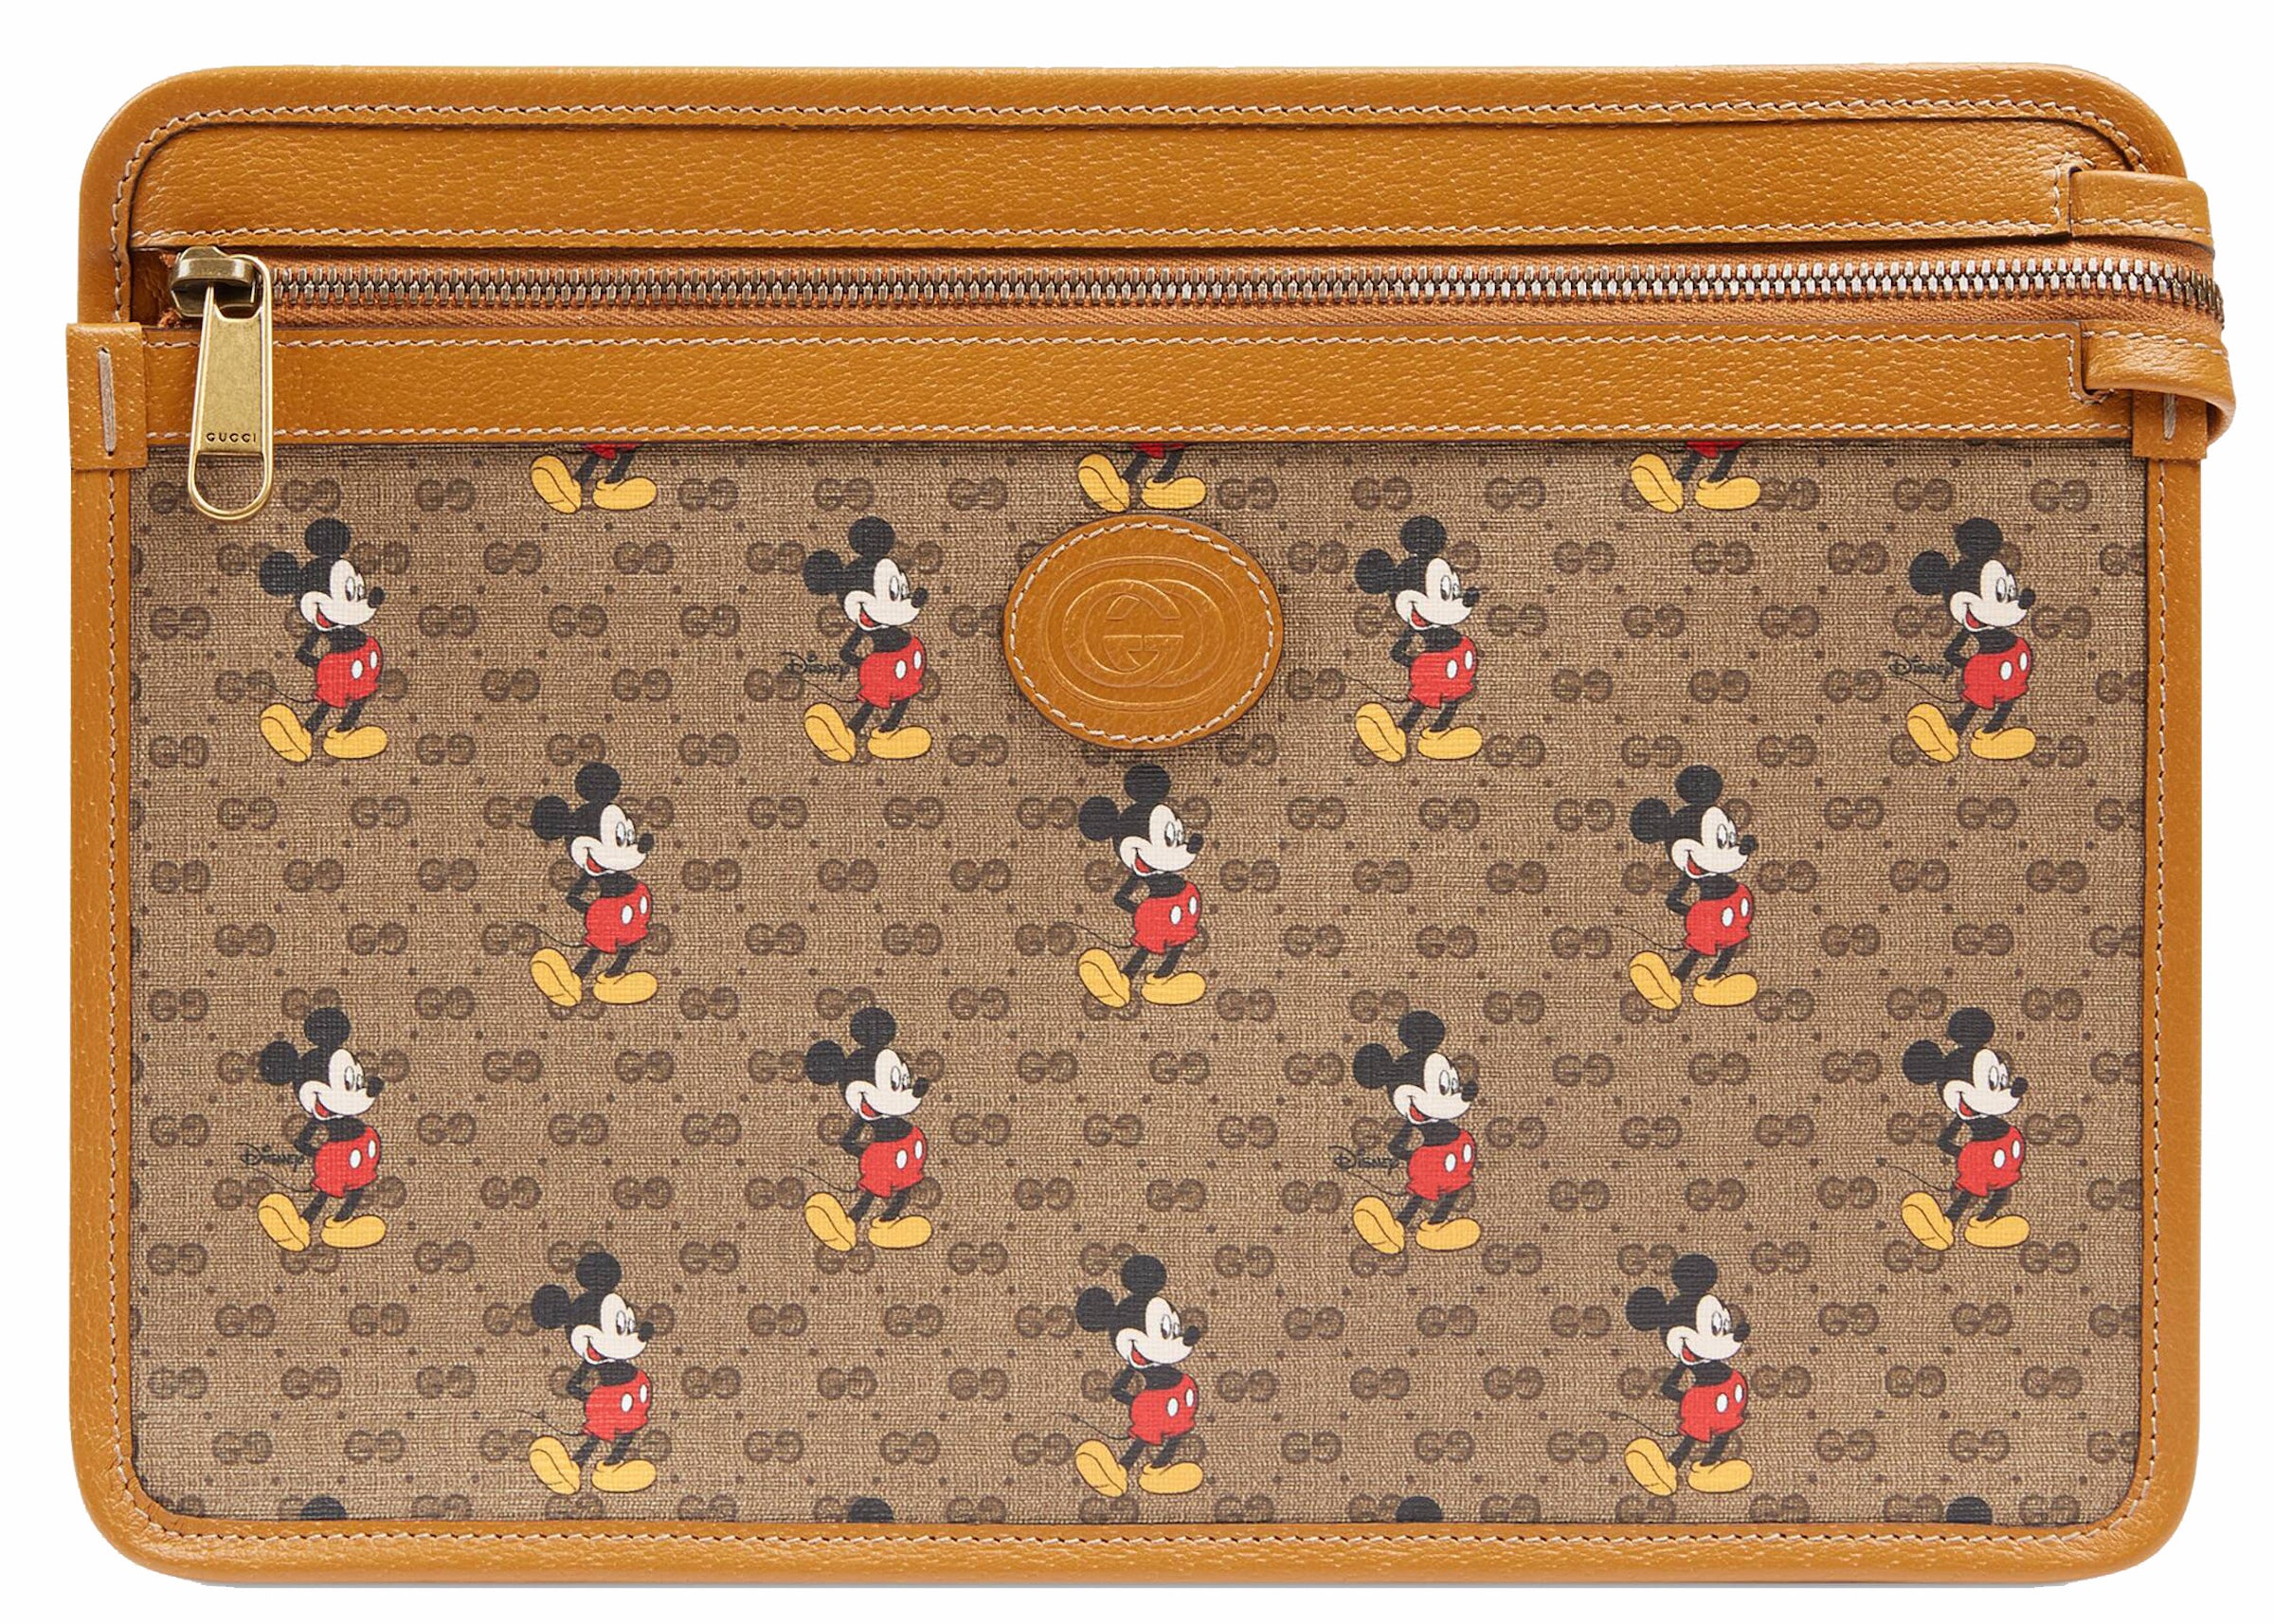 Disney X Coach Small Zip Around Wallet With Mickey Mouse And